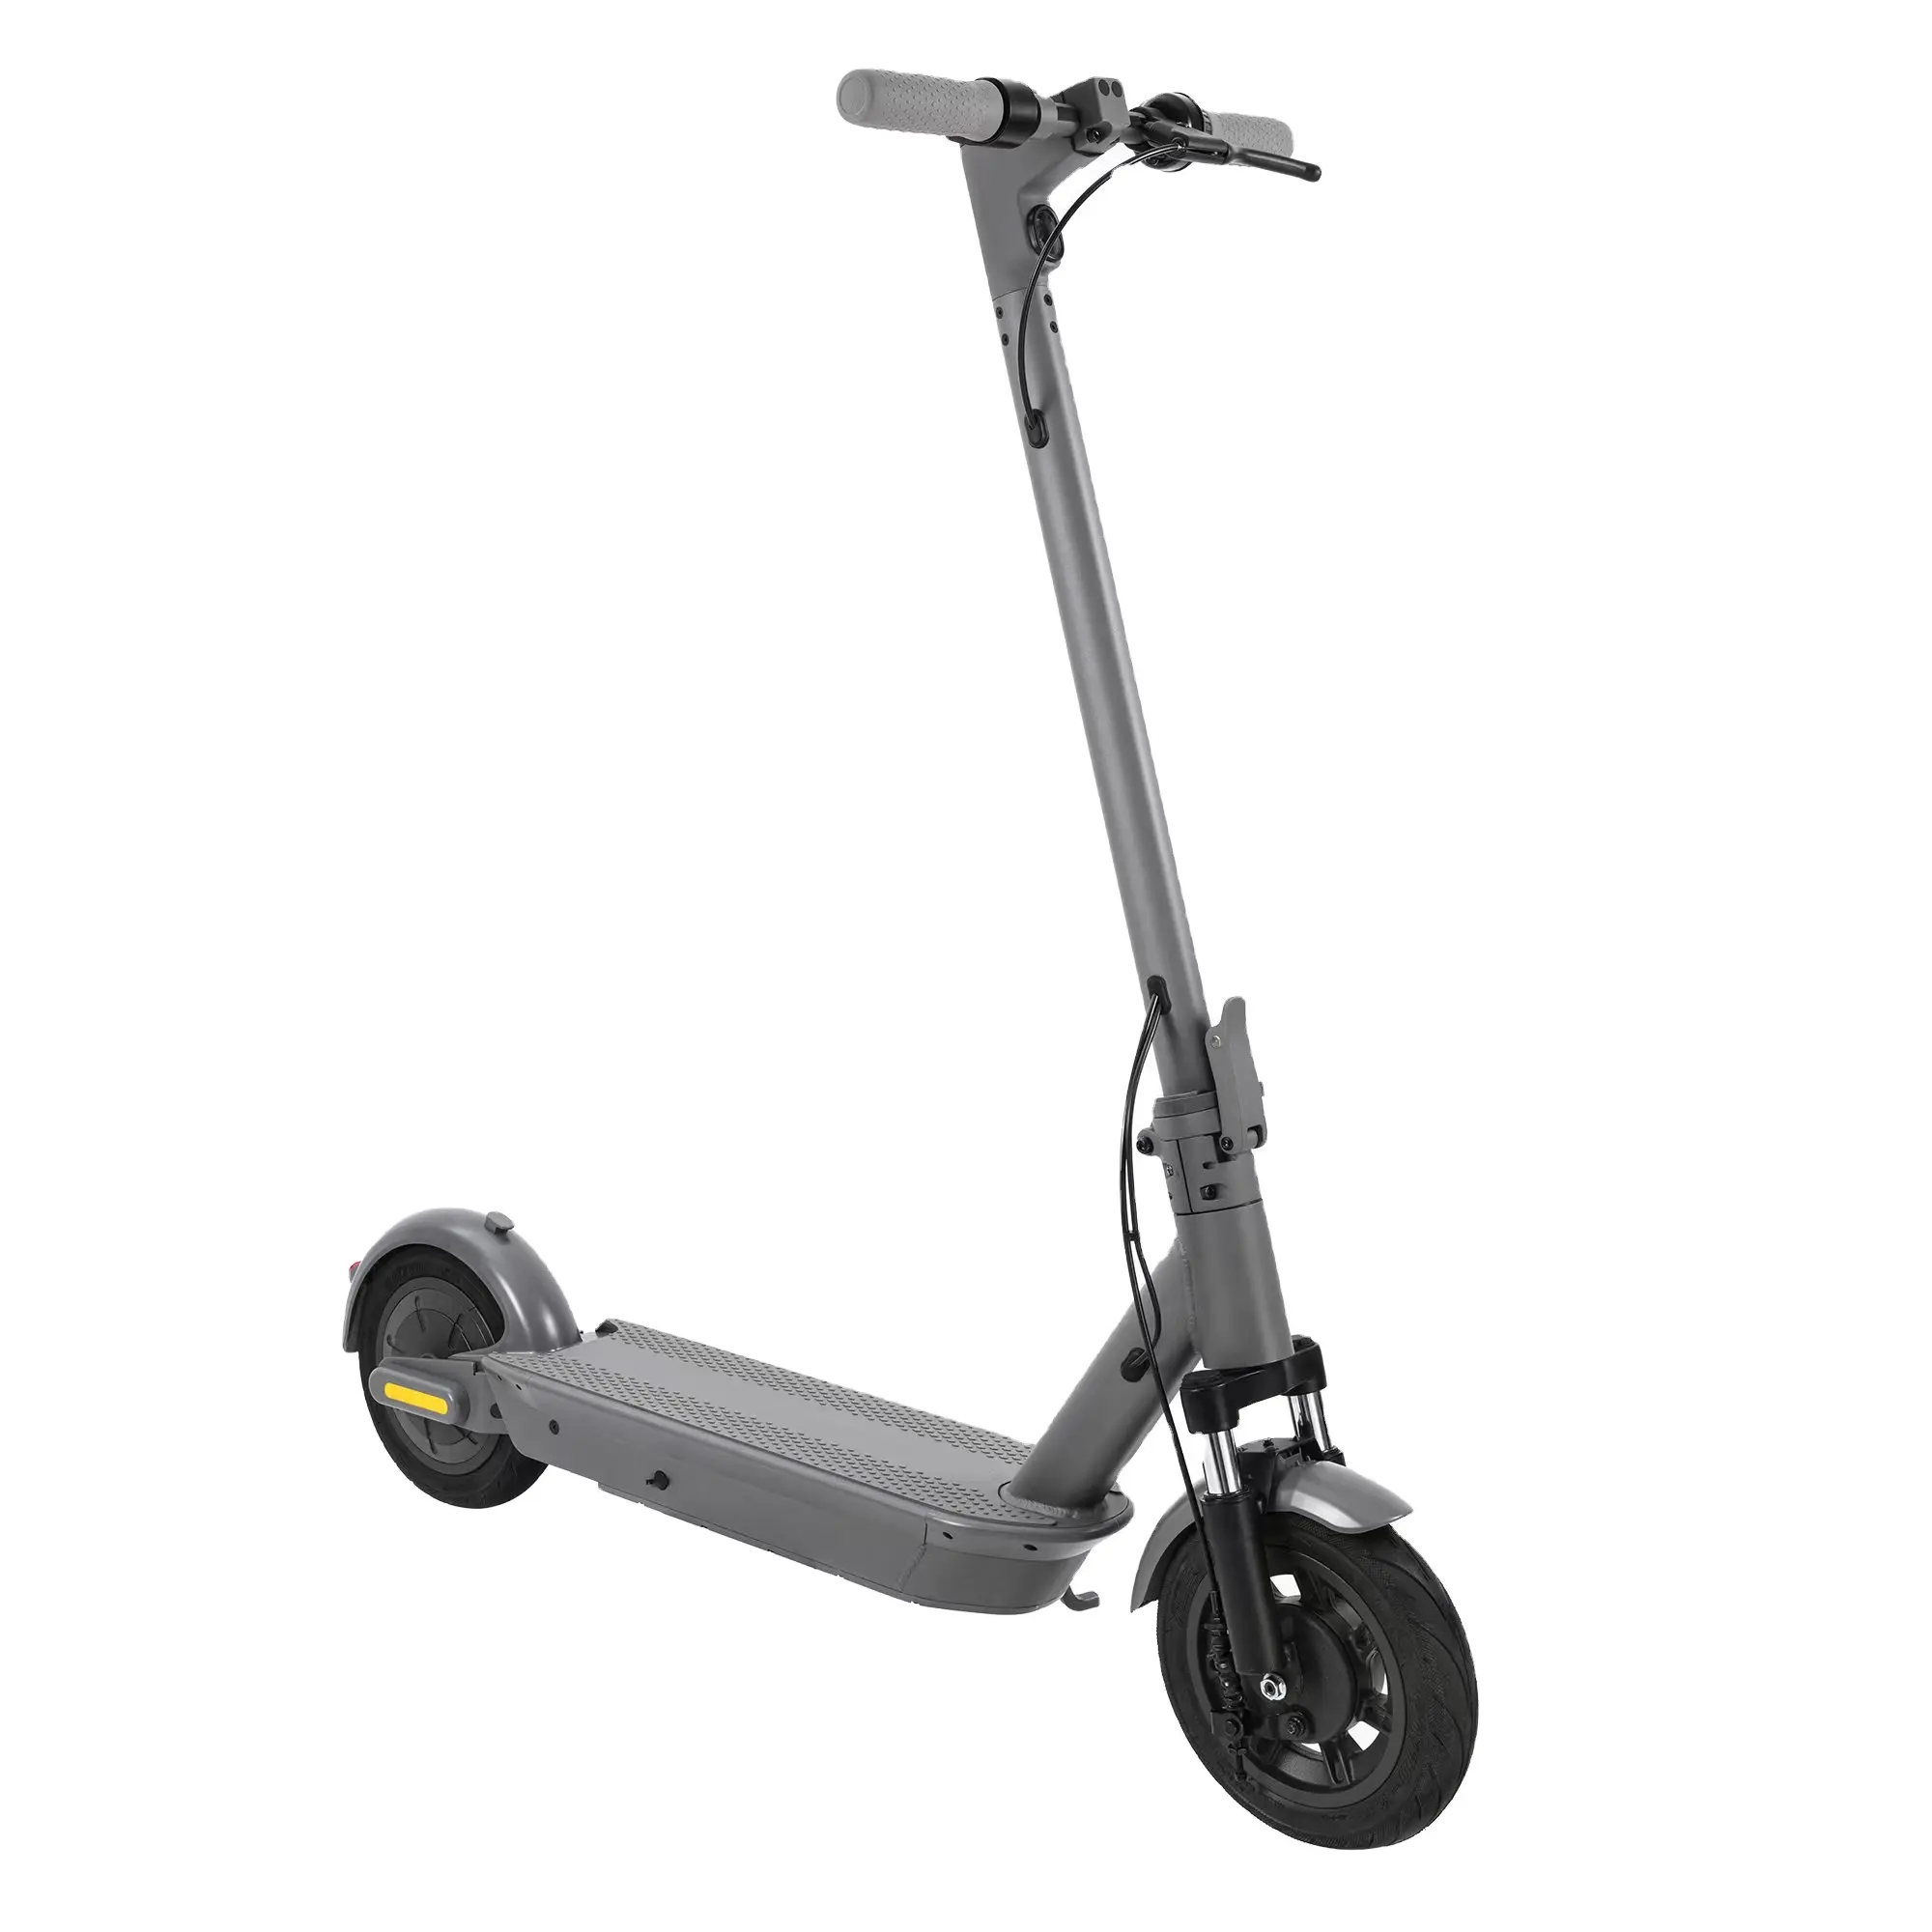 10 Inch 36v 15.4Ah 500w Electric Scooter City Portable Driving Scooter Adult Double Wheel Folding Electric Scooter